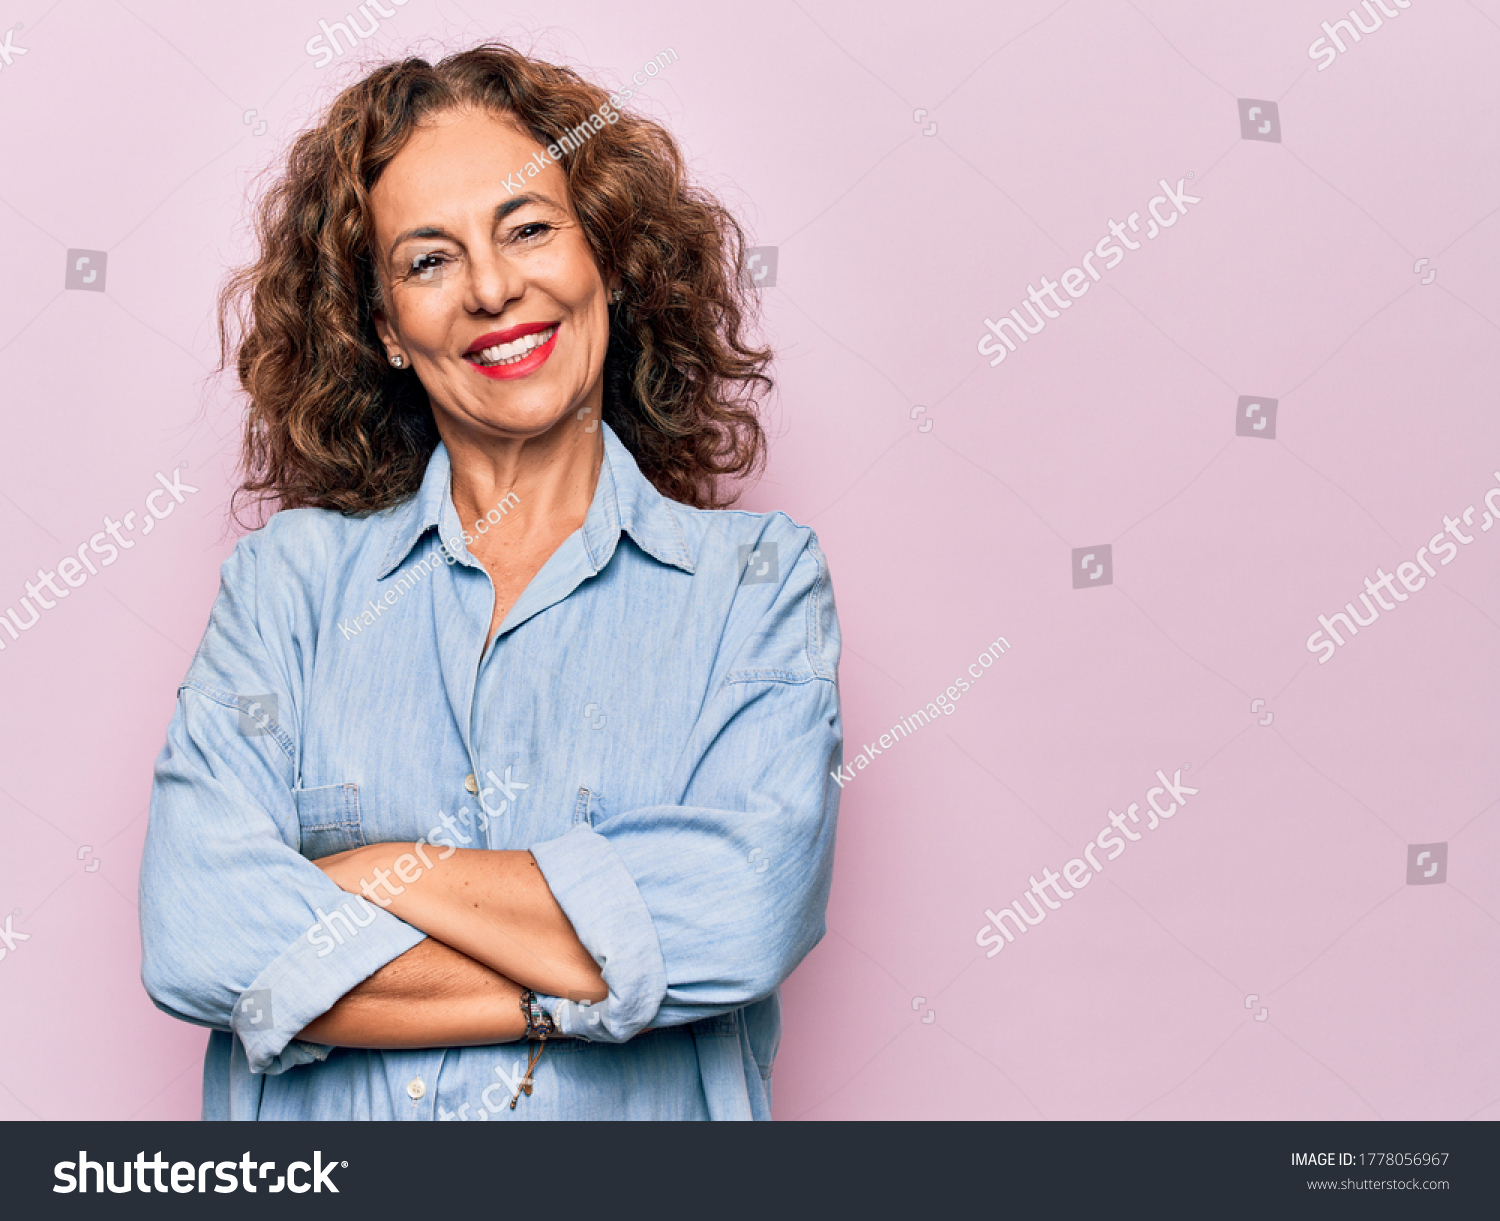 Middle age beautiful woman wearing casual denim shirt standing over pink background happy face smiling with crossed arms looking at the camera. Positive person. #1778056967